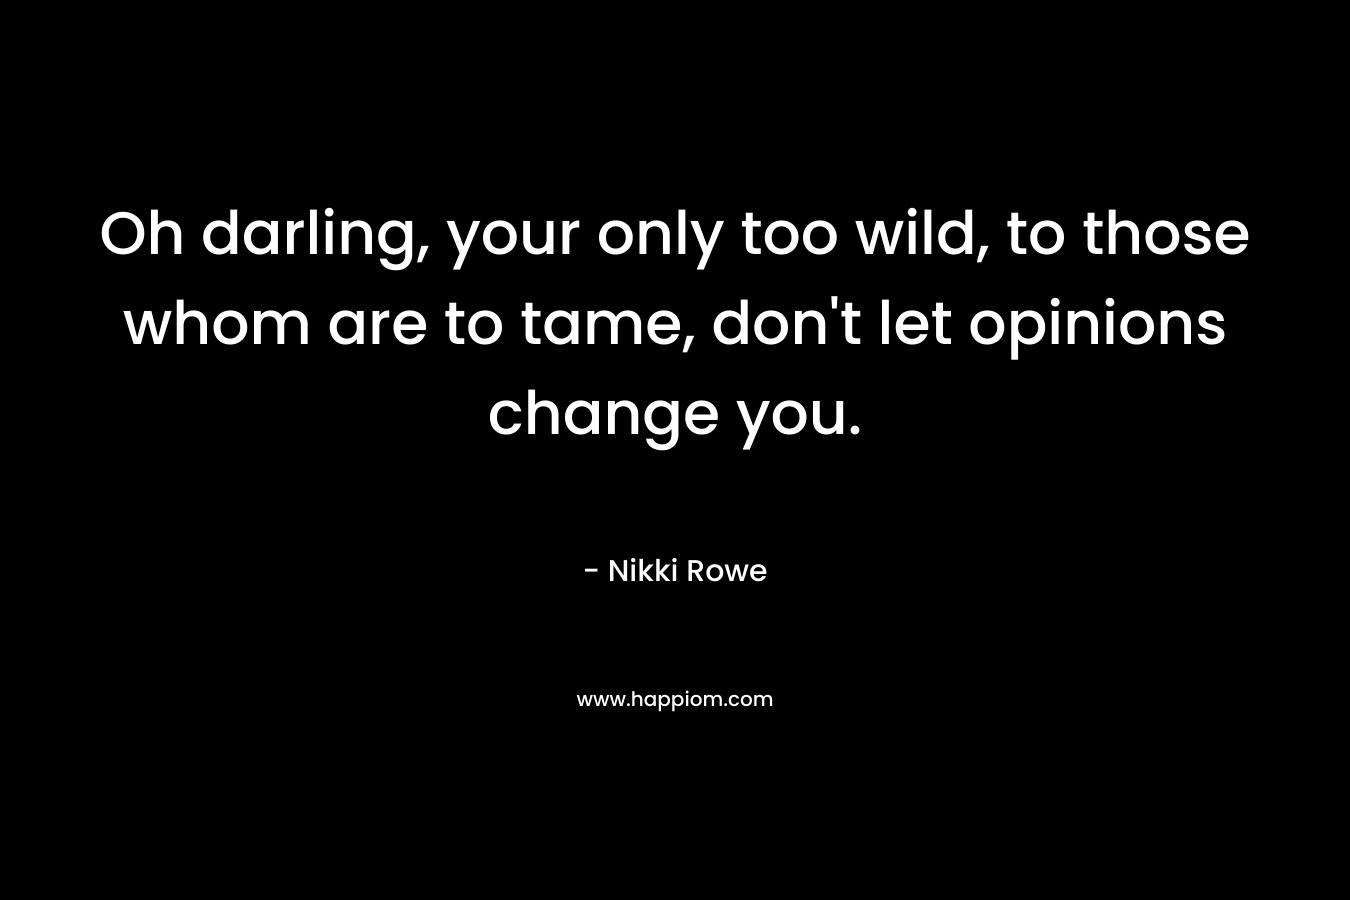 Oh darling, your only too wild, to those whom are to tame, don’t let opinions change you. – Nikki Rowe